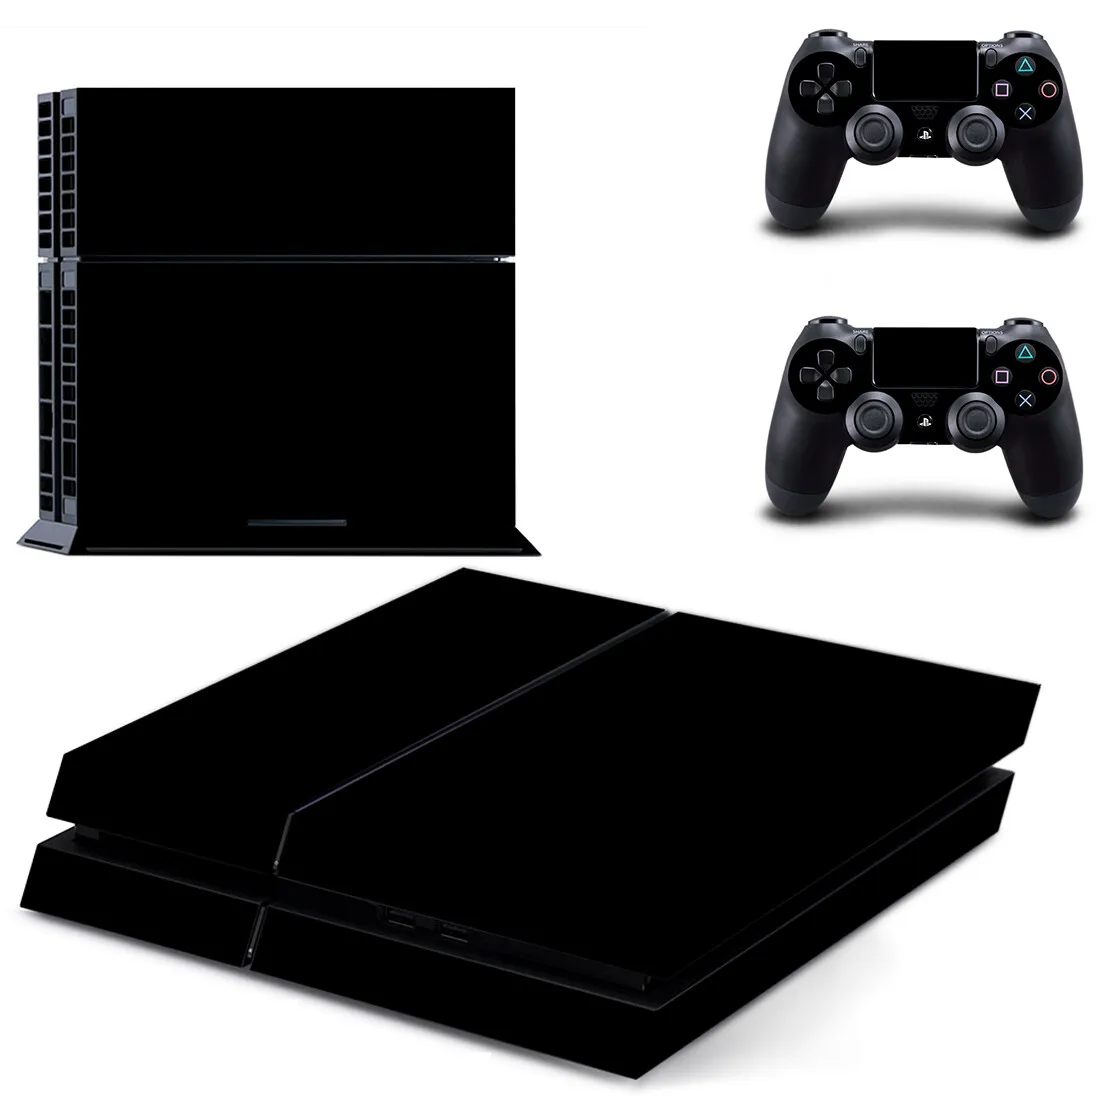 Pure Black Color PS4 Stickers Play station 4 Skin Sticker Decals For PlayStation 4 PS4 Console & Controller Skins Vinyl